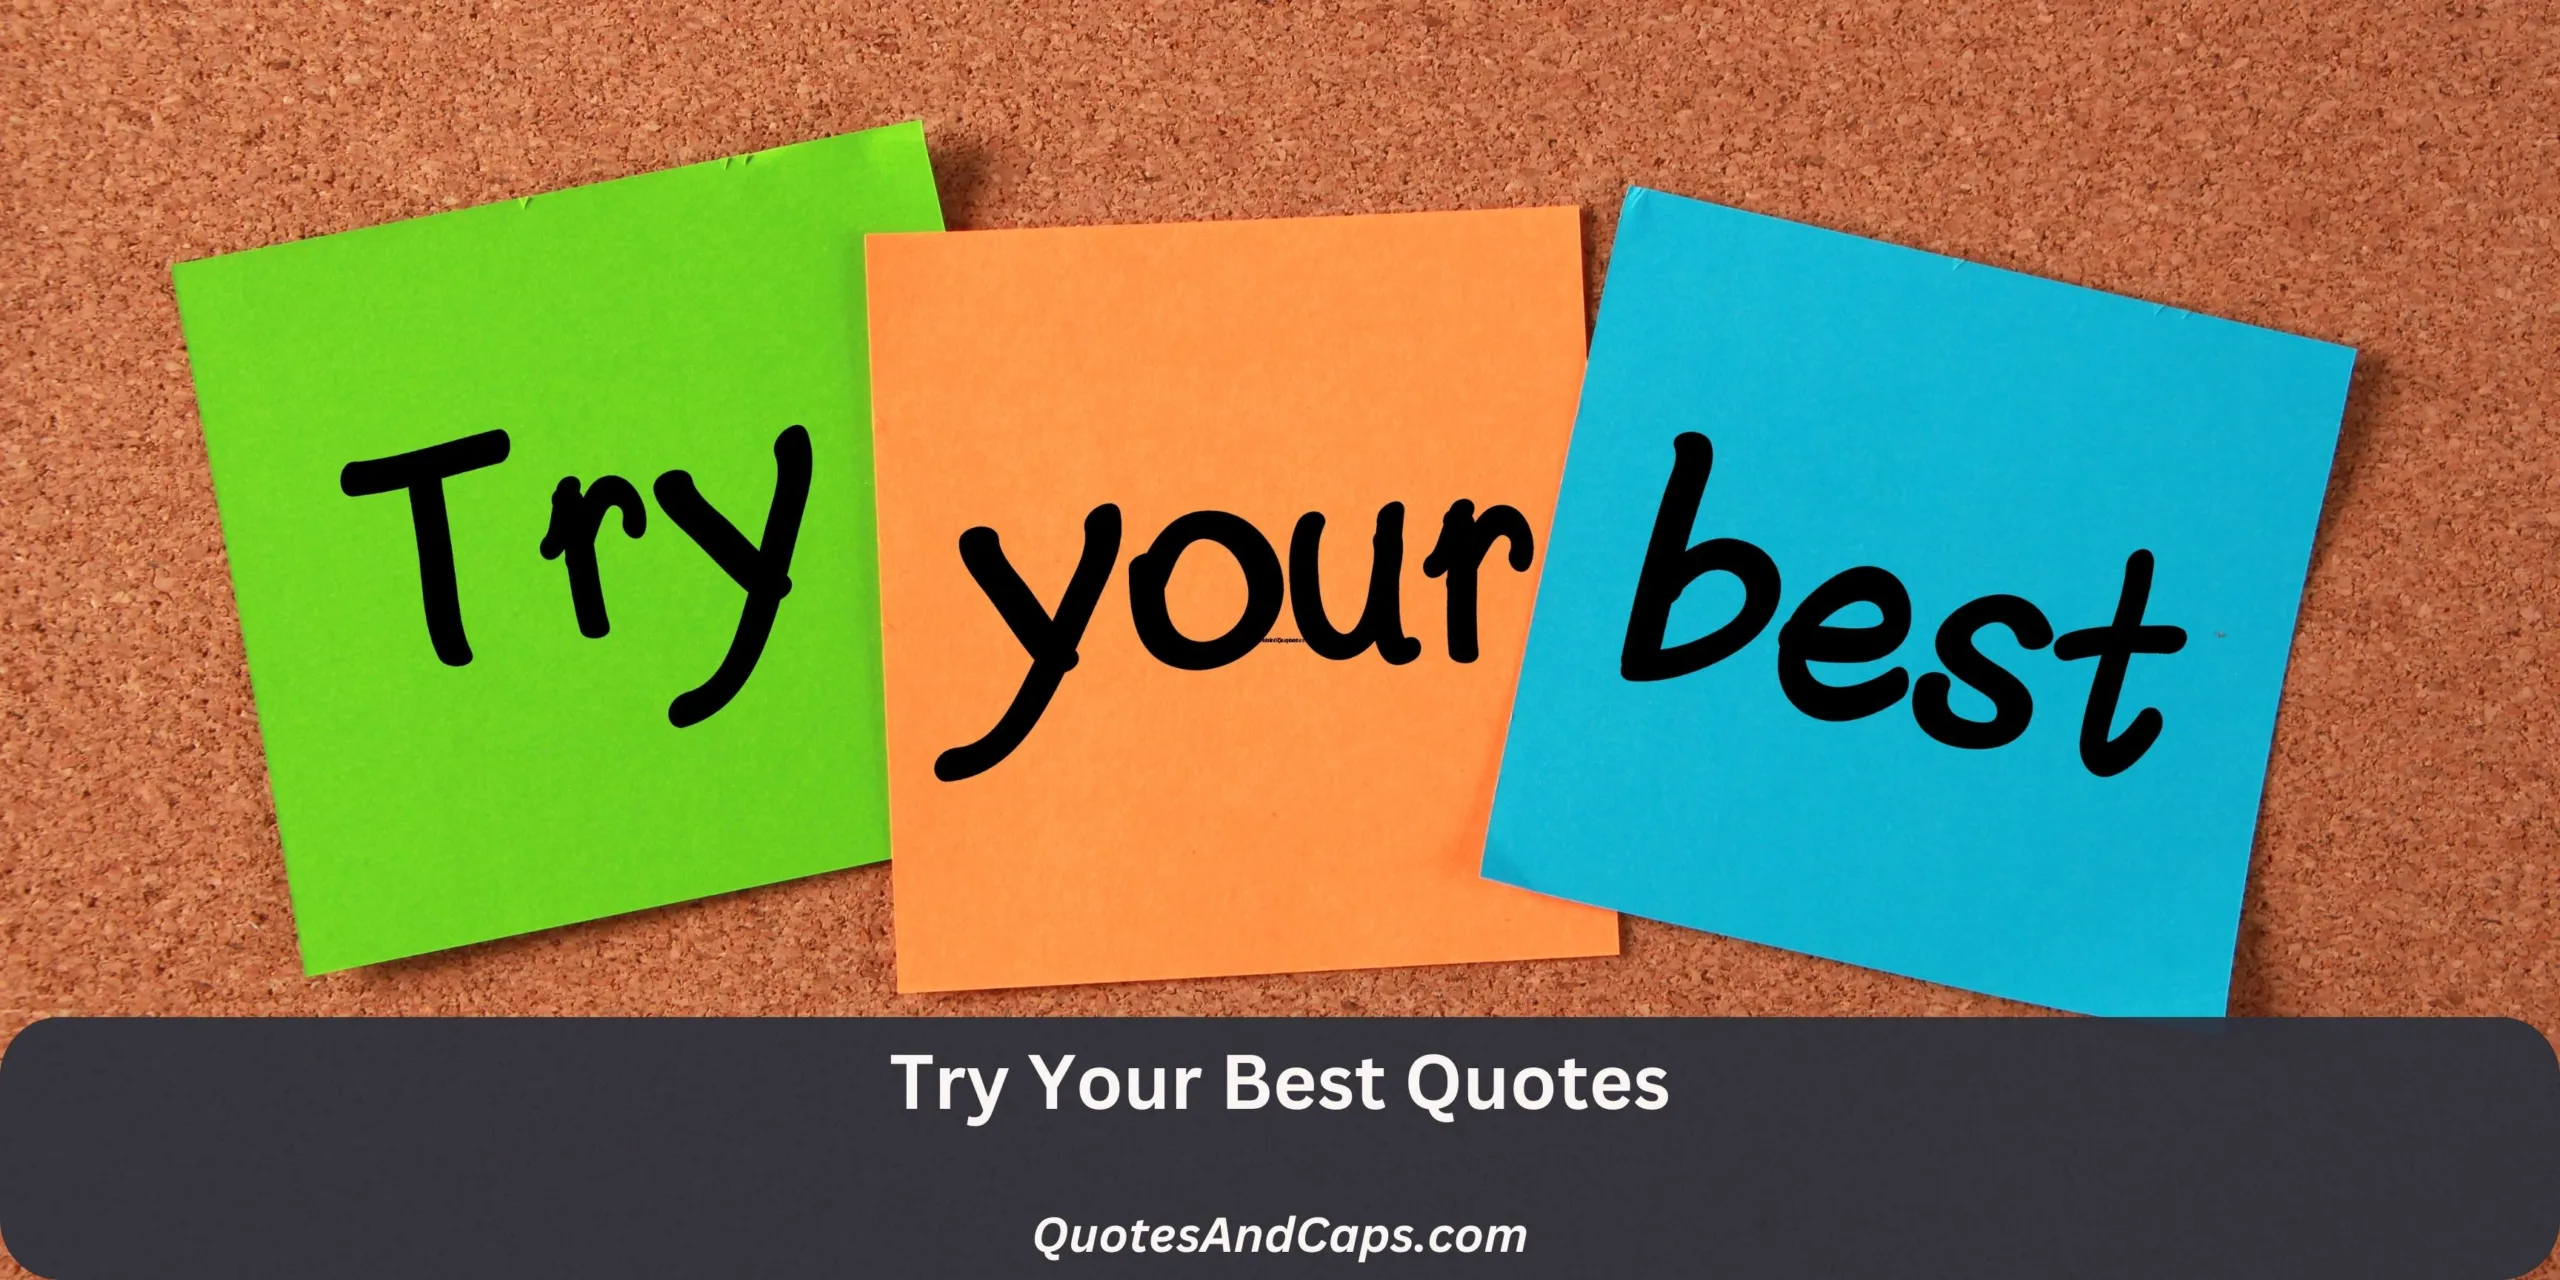 Try Your Best Quotes